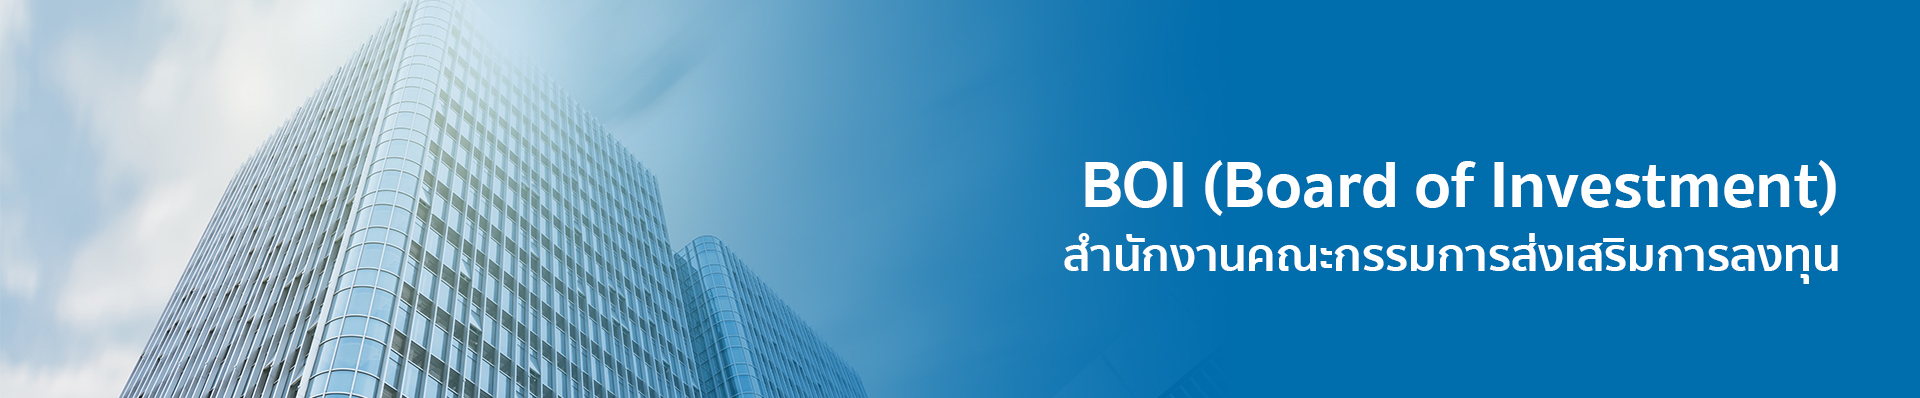 Thailand Board Of Investment (BOI)